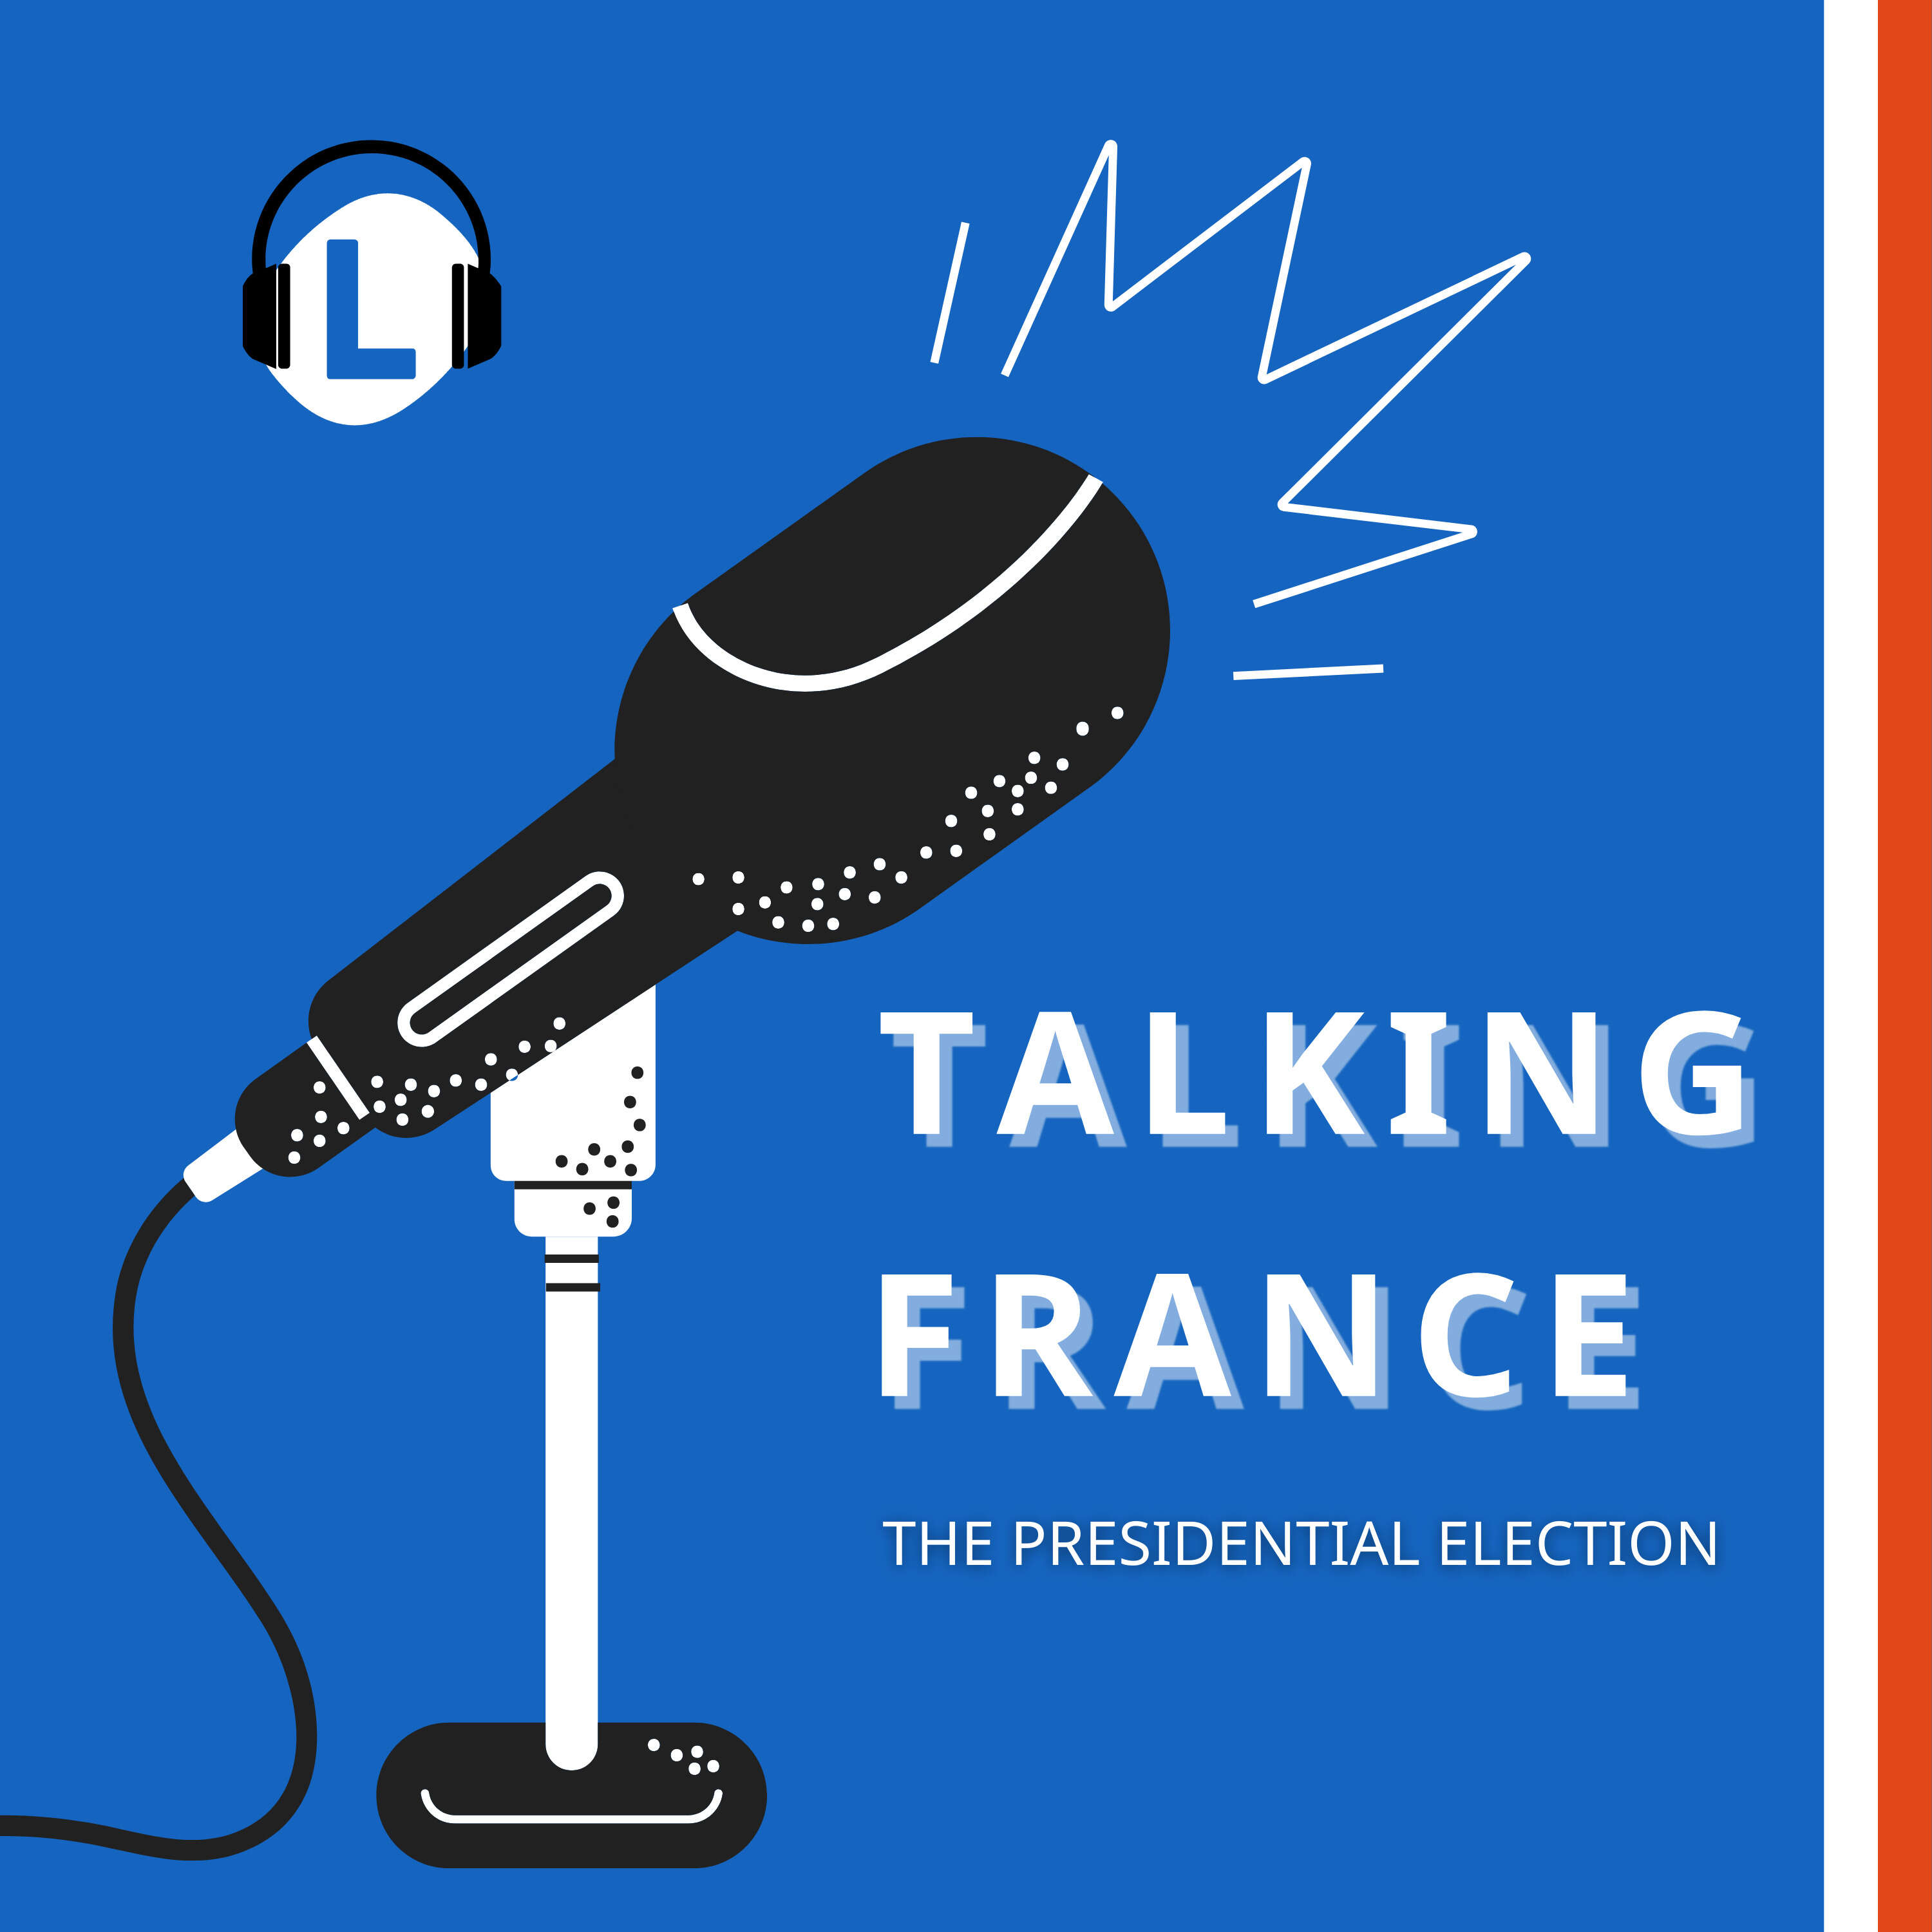 Has Putin guaranteed Macron victory, and how worried should France be about rising prices?